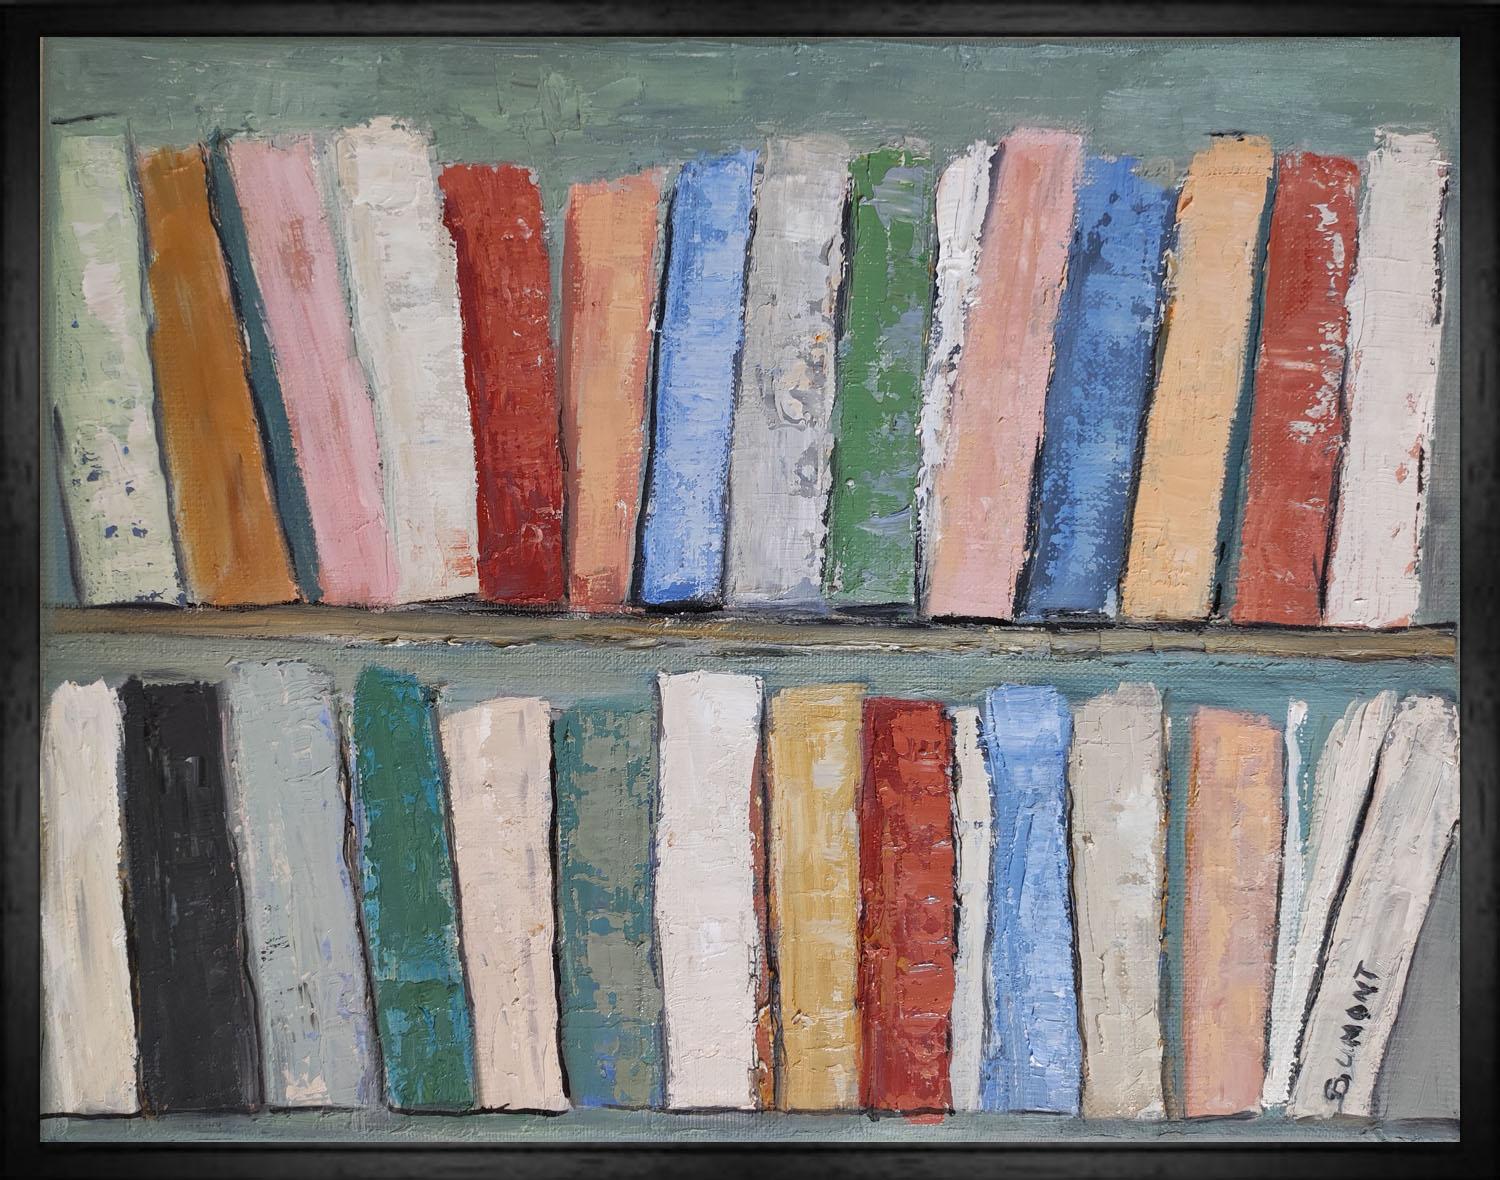 SOPHIE DUMONT Interior Painting - les livres, colorful abstract,  oil on canvas, libraries series, expressionism